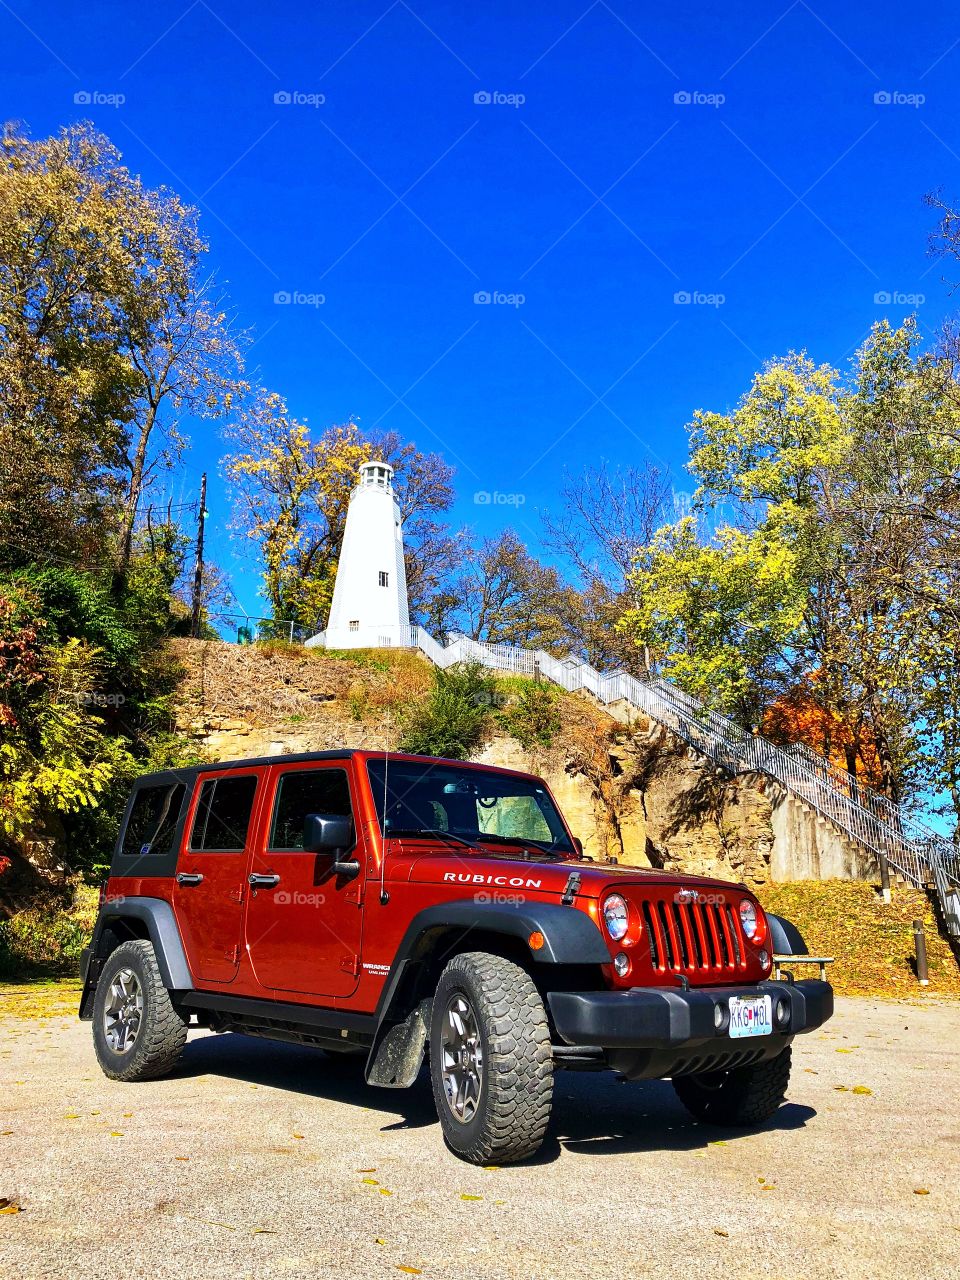 Jeep Rubicon and light house